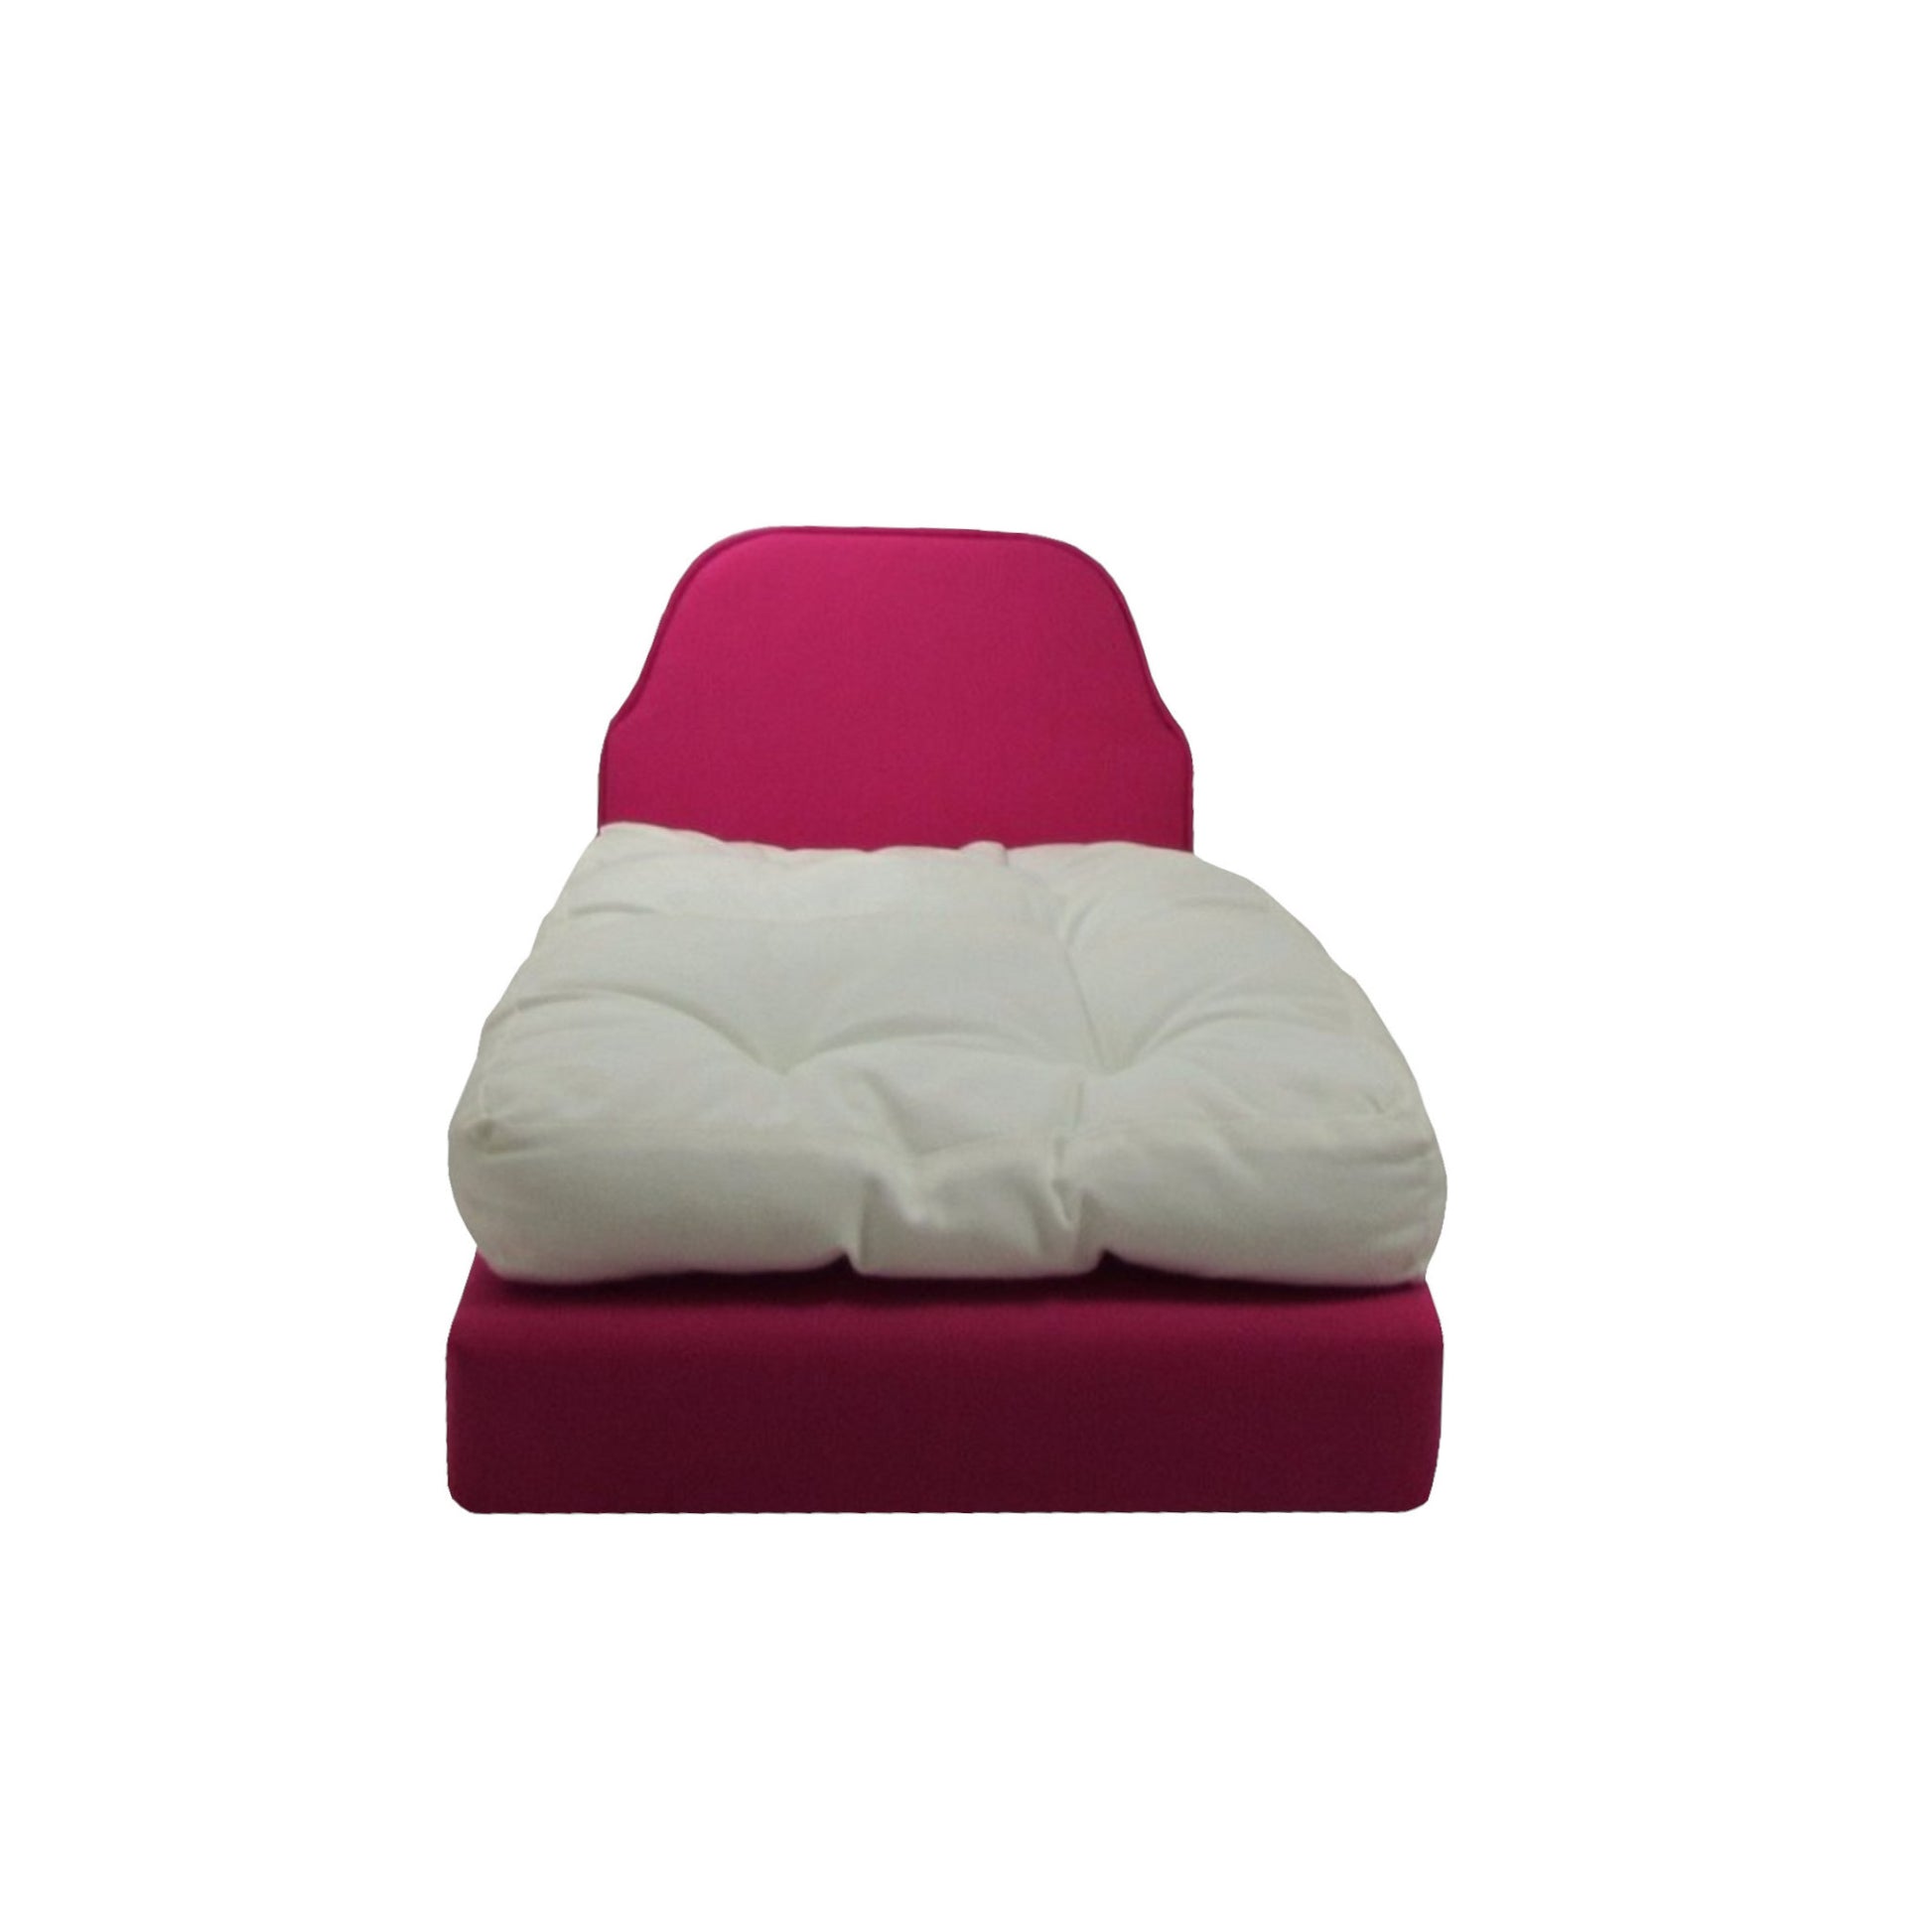 Upholstered Bright Pink Doll Bed for 18-inch dolls Second view